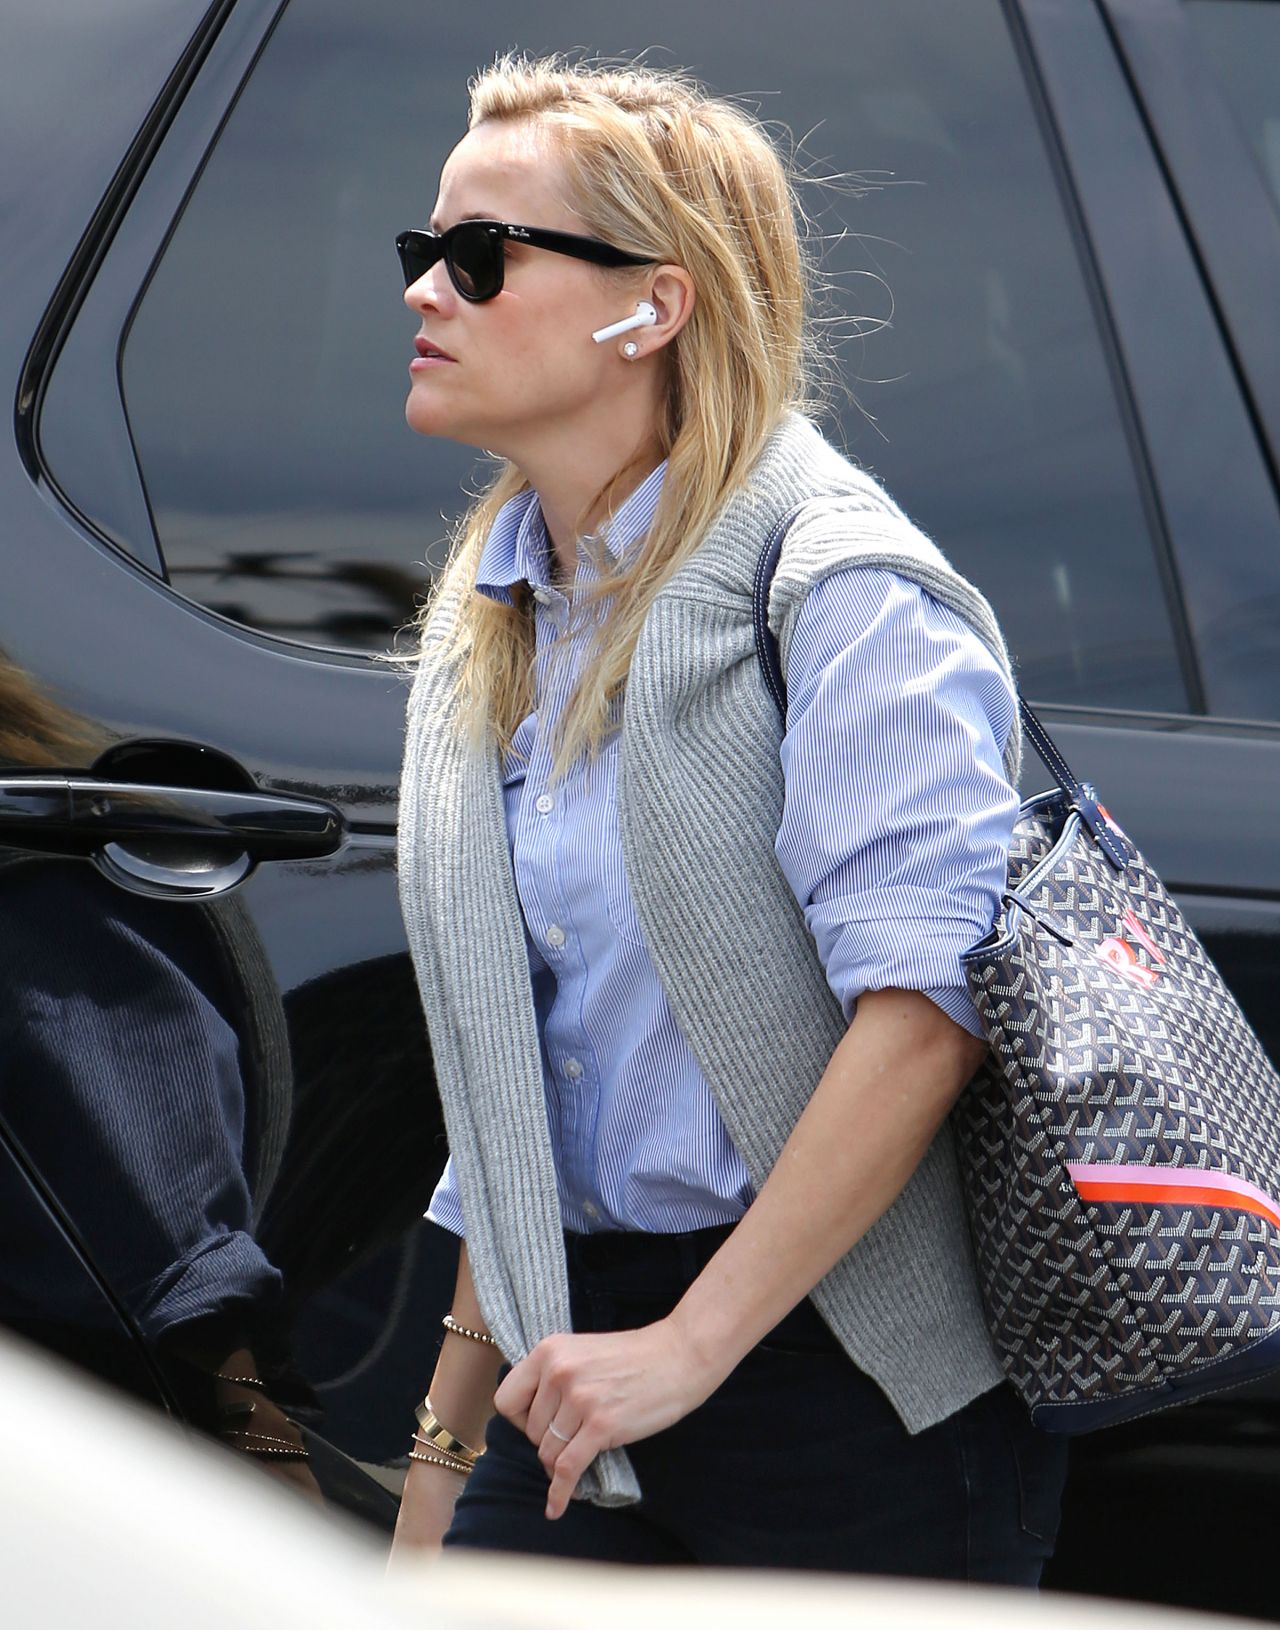 Reese Witherspoon is seen on April 15, 2019 in Los Angeles